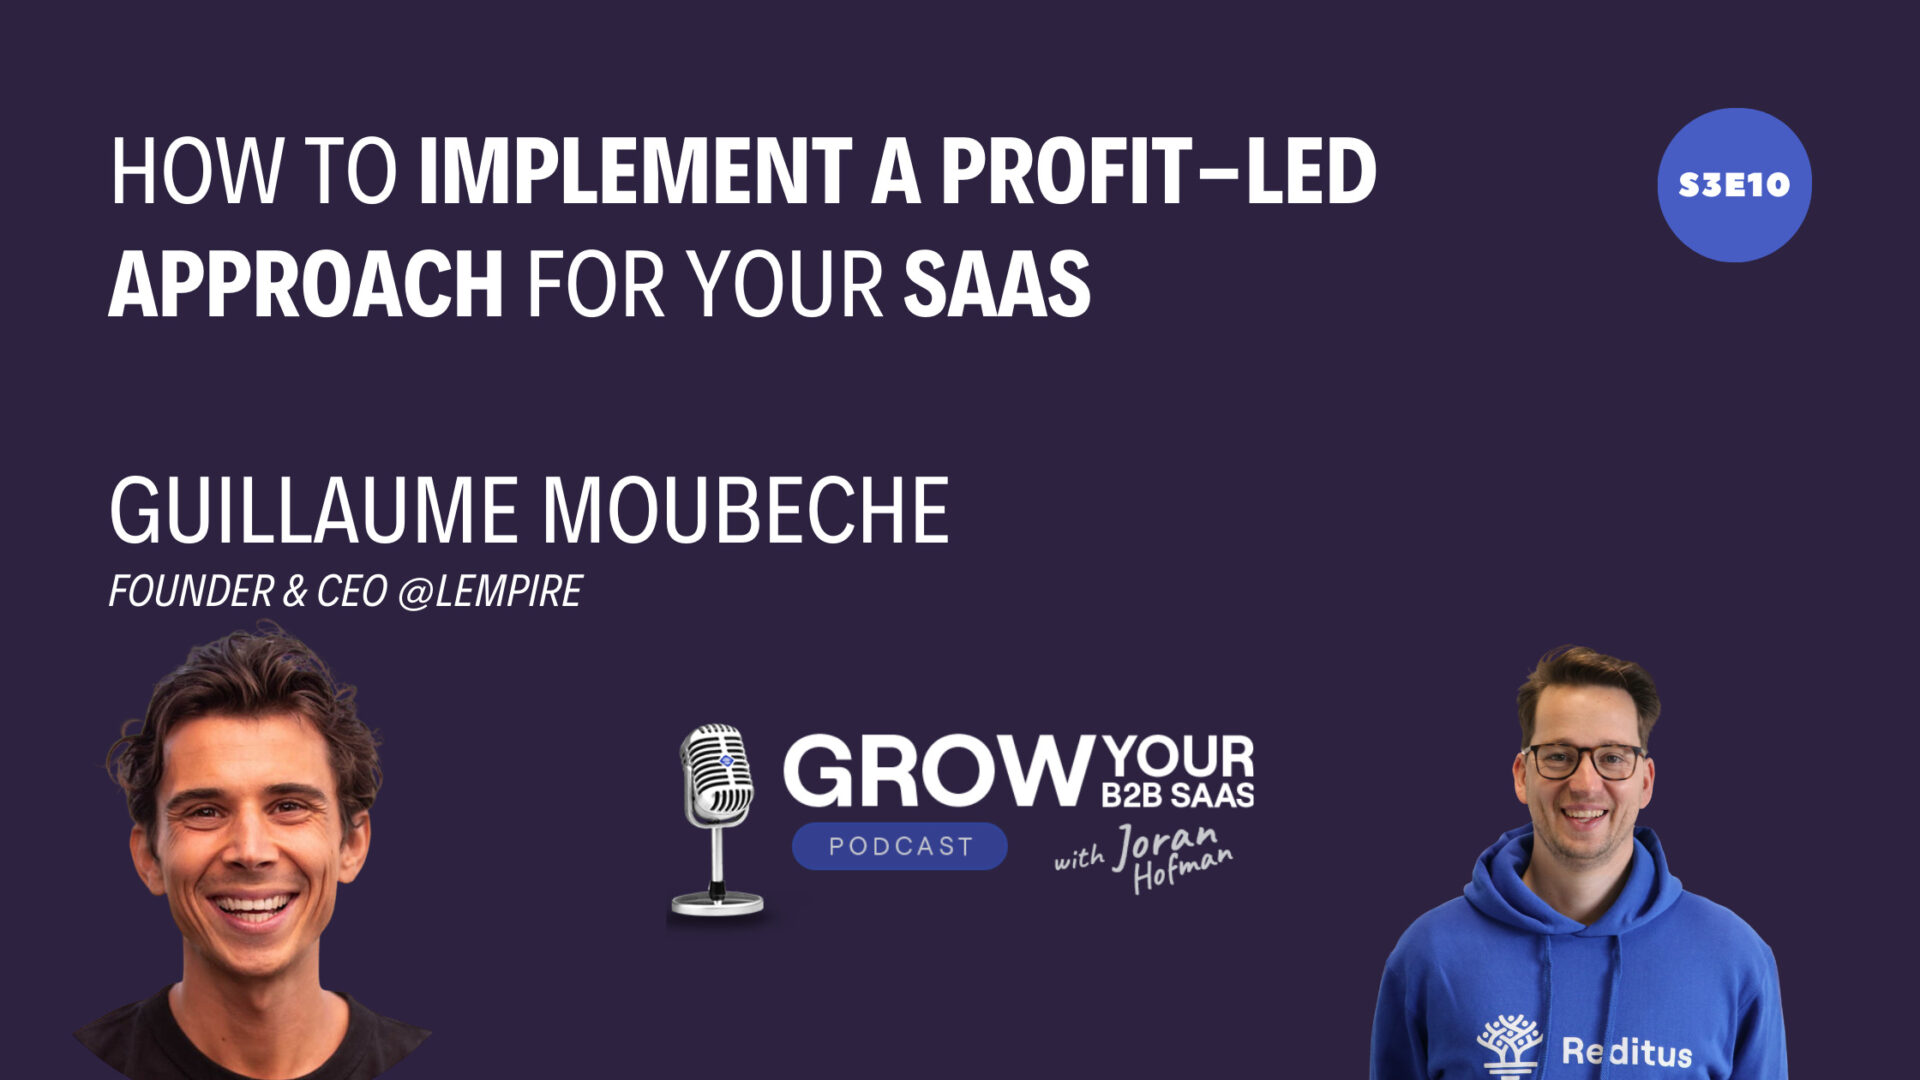 S3E10 – How to implement a profit-led approach for your SaaS with Guillaume Moubeche